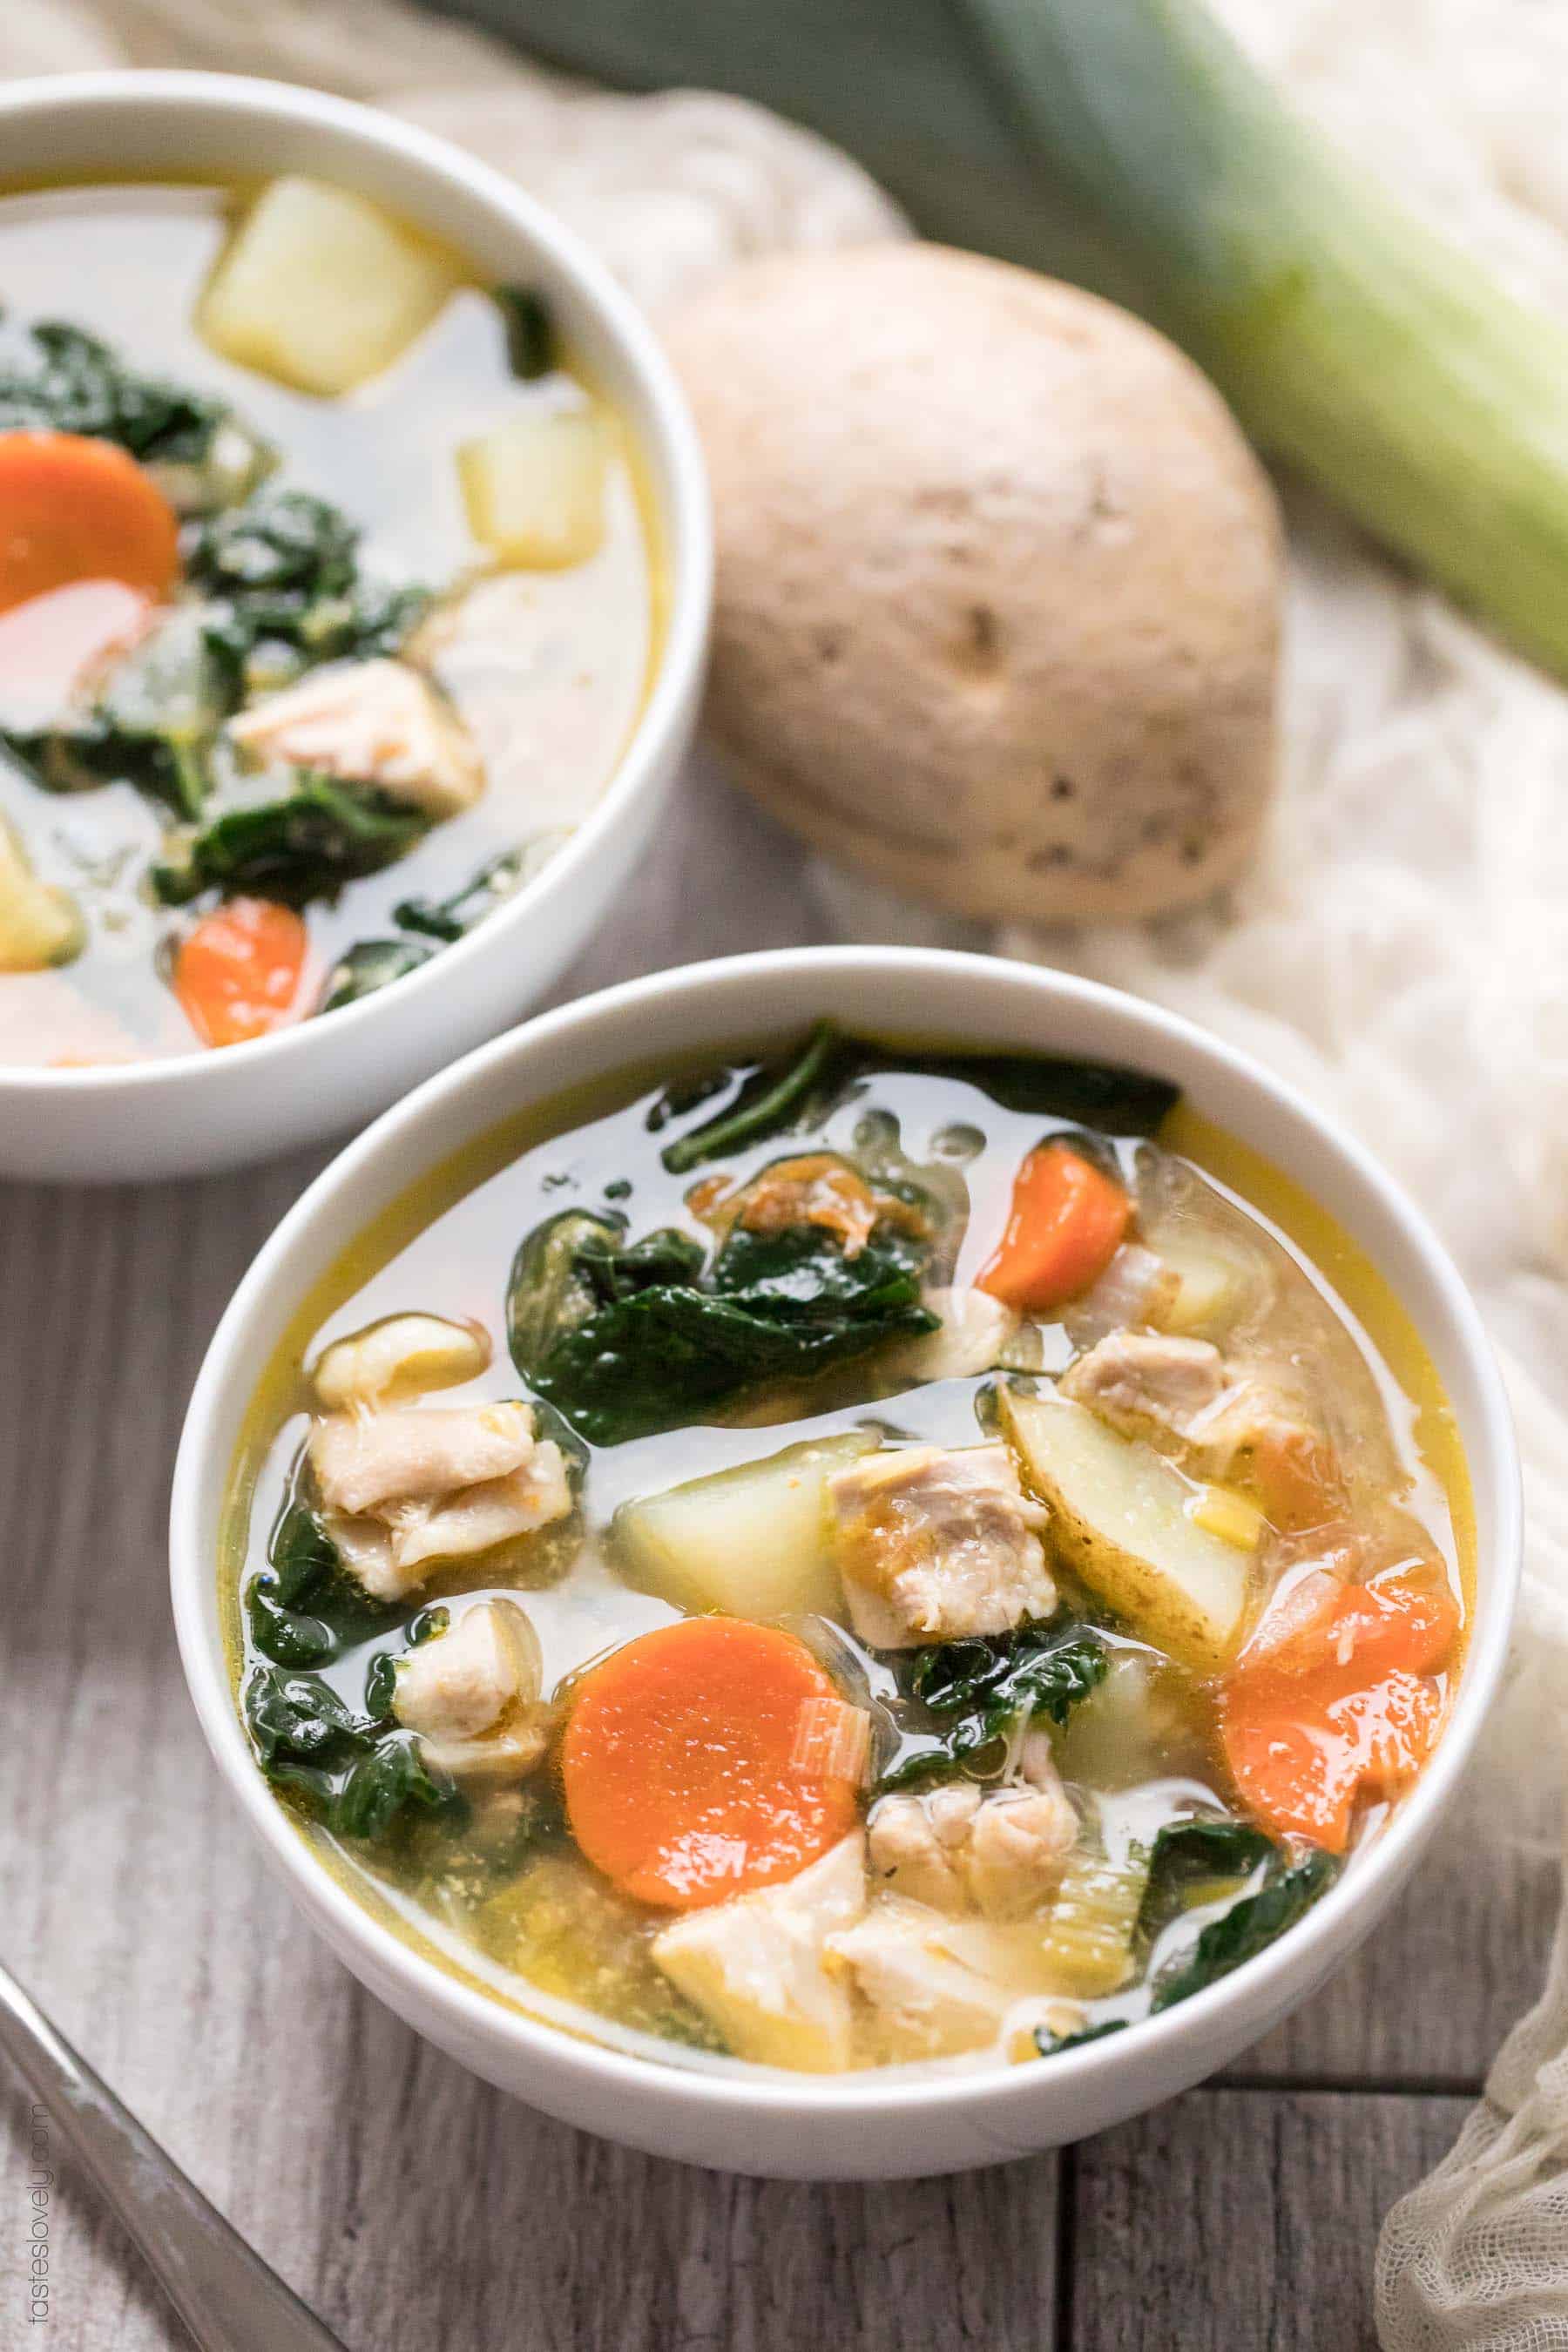 Paleo & Whole30 Potato, Leek & Chicken Soup with Kale - a healthy and flavorful detox soup recipe. Gluten free, grain free, sugar free, dairy free, clean eating.